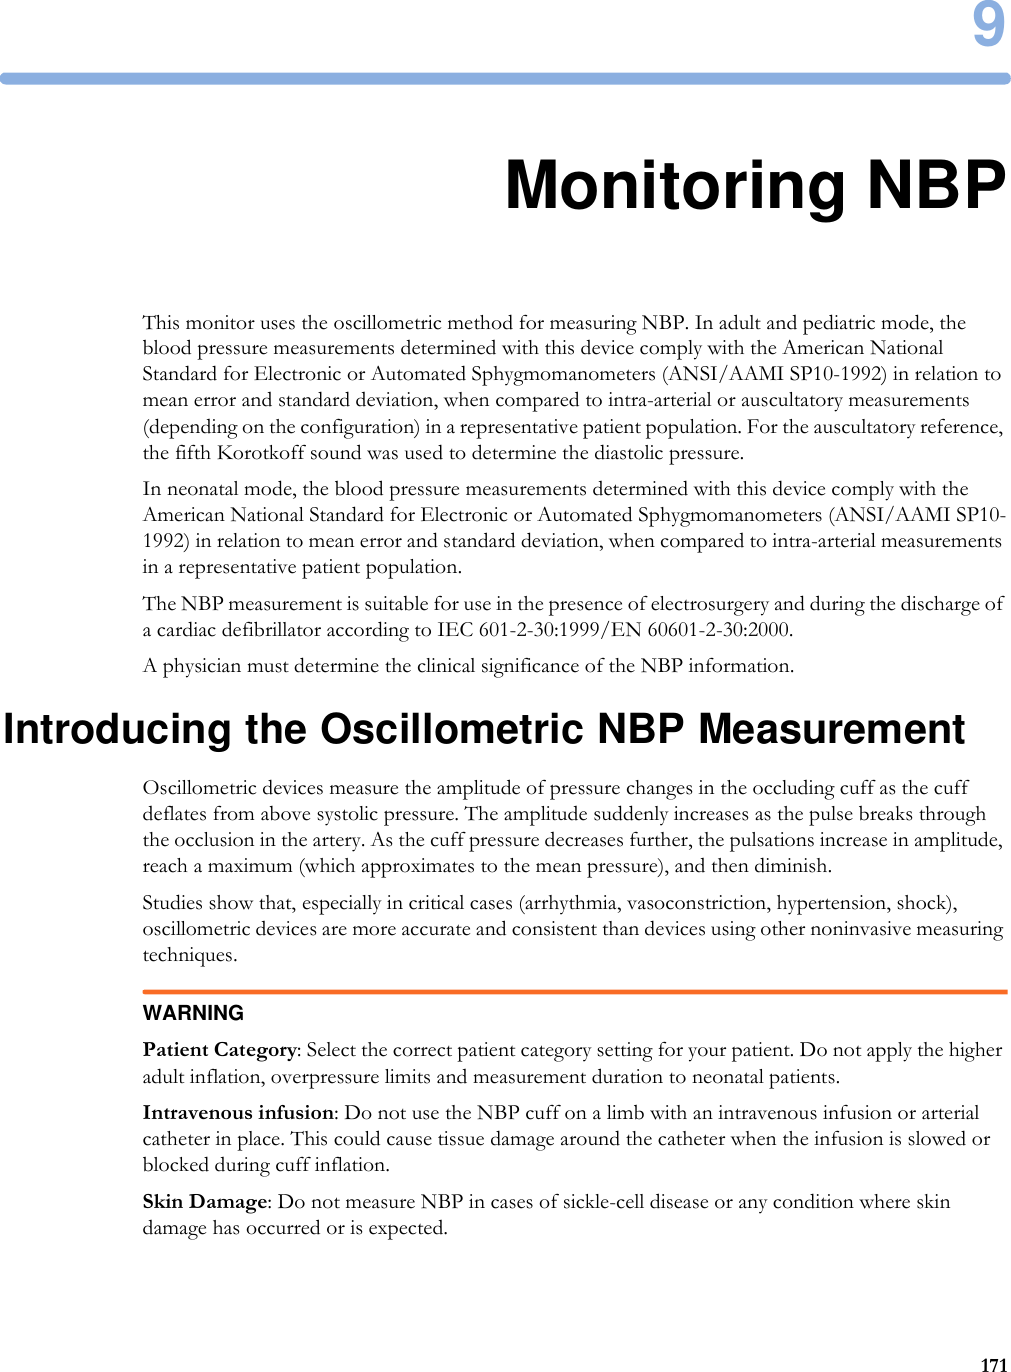 91719Monitoring NBPThis monitor uses the oscillometric method for measuring NBP. In adult and pediatric mode, the blood pressure measurements determined with this device comply with the American National Standard for Electronic or Automated Sphygmomanometers (ANSI/AAMI SP10-1992) in relation to mean error and standard deviation, when compared to intra-arterial or auscultatory measurements (depending on the configuration) in a representative patient population. For the auscultatory reference, the fifth Korotkoff sound was used to determine the diastolic pressure.In neonatal mode, the blood pressure measurements determined with this device comply with the American National Standard for Electronic or Automated Sphygmomanometers (ANSI/AAMI SP10-1992) in relation to mean error and standard deviation, when compared to intra-arterial measurements in a representative patient population.The NBP measurement is suitable for use in the presence of electrosurgery and during the discharge of a cardiac defibrillator according to IEC 601-2-30:1999/EN 60601-2-30:2000.A physician must determine the clinical significance of the NBP information.Introducing the Oscillometric NBP MeasurementOscillometric devices measure the amplitude of pressure changes in the occluding cuff as the cuff deflates from above systolic pressure. The amplitude suddenly increases as the pulse breaks through the occlusion in the artery. As the cuff pressure decreases further, the pulsations increase in amplitude, reach a maximum (which approximates to the mean pressure), and then diminish.Studies show that, especially in critical cases (arrhythmia, vasoconstriction, hypertension, shock), oscillometric devices are more accurate and consistent than devices using other noninvasive measuring techniques.WARNINGPatient Category: Select the correct patient category setting for your patient. Do not apply the higher adult inflation, overpressure limits and measurement duration to neonatal patients.Intravenous infusion: Do not use the NBP cuff on a limb with an intravenous infusion or arterial catheter in place. This could cause tissue damage around the catheter when the infusion is slowed or blocked during cuff inflation.Skin Damage: Do not measure NBP in cases of sickle-cell disease or any condition where skin damage has occurred or is expected.